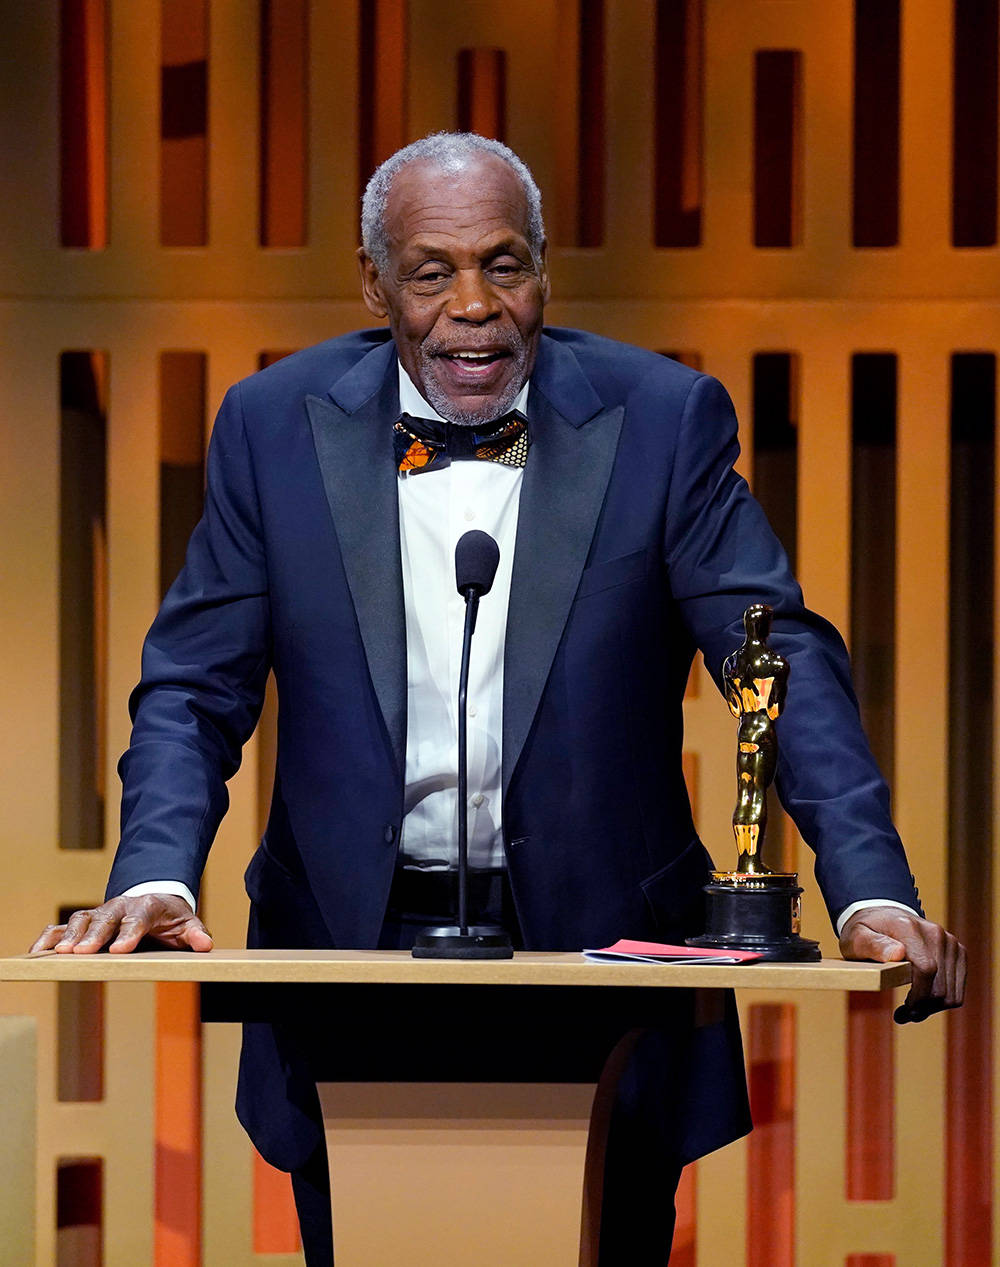 Danny Glover At The Oscars 2022 Wallpaper